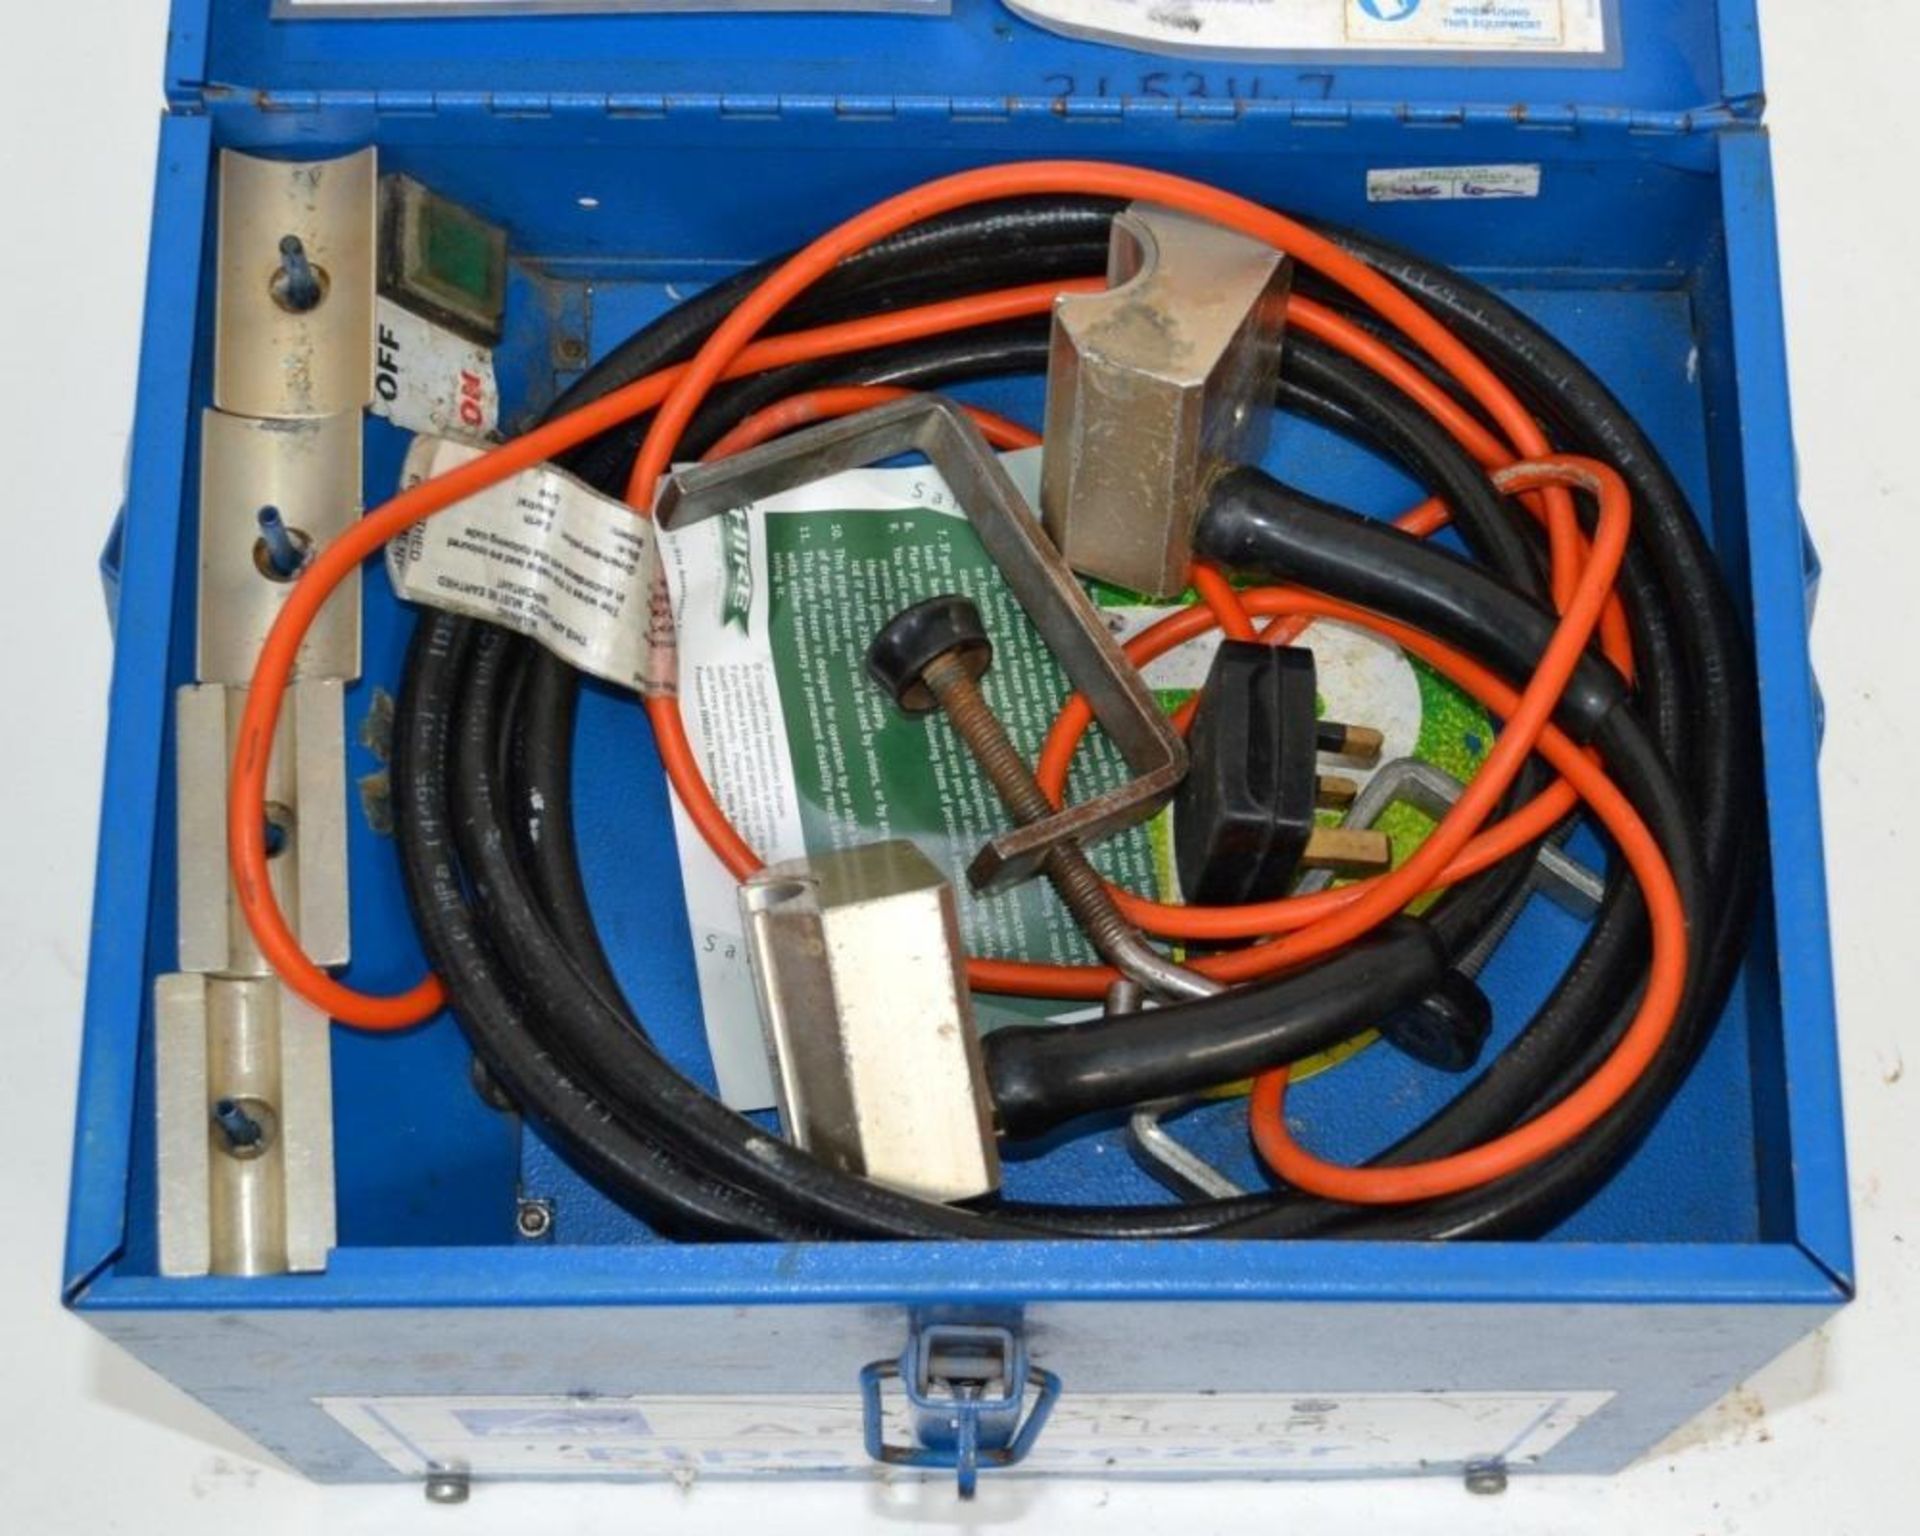 1 x Freeze Master Arctic Freeze Electric Pipe Freezer - UK Mains 220/240 volt - Used In Working - Image 11 of 12